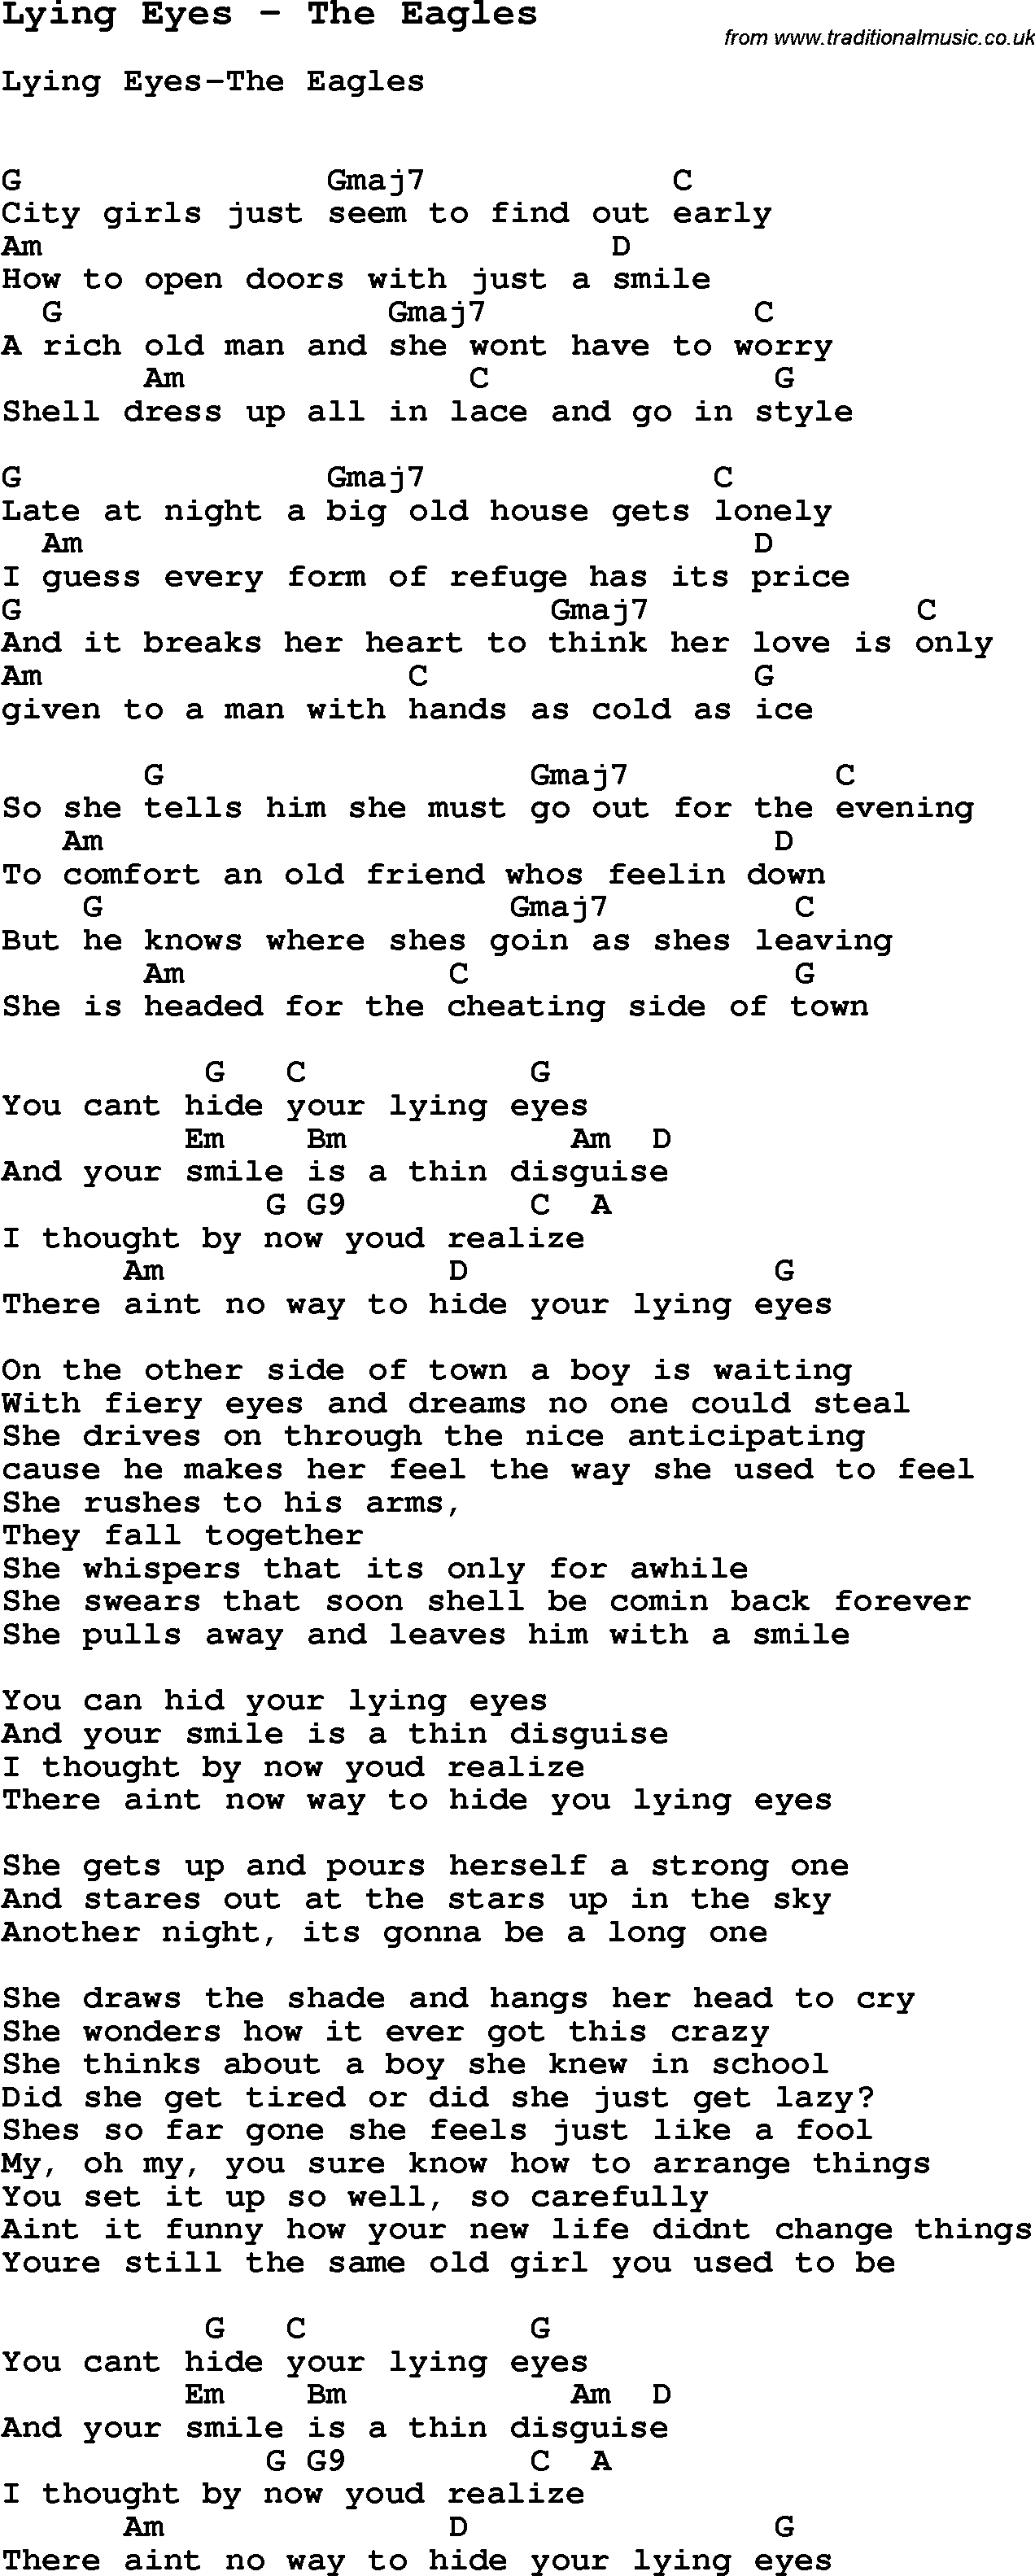 Song Lying Eyes by The Eagles, with lyrics for vocal performance and accompaniment chords for Ukulele, Guitar Banjo etc.